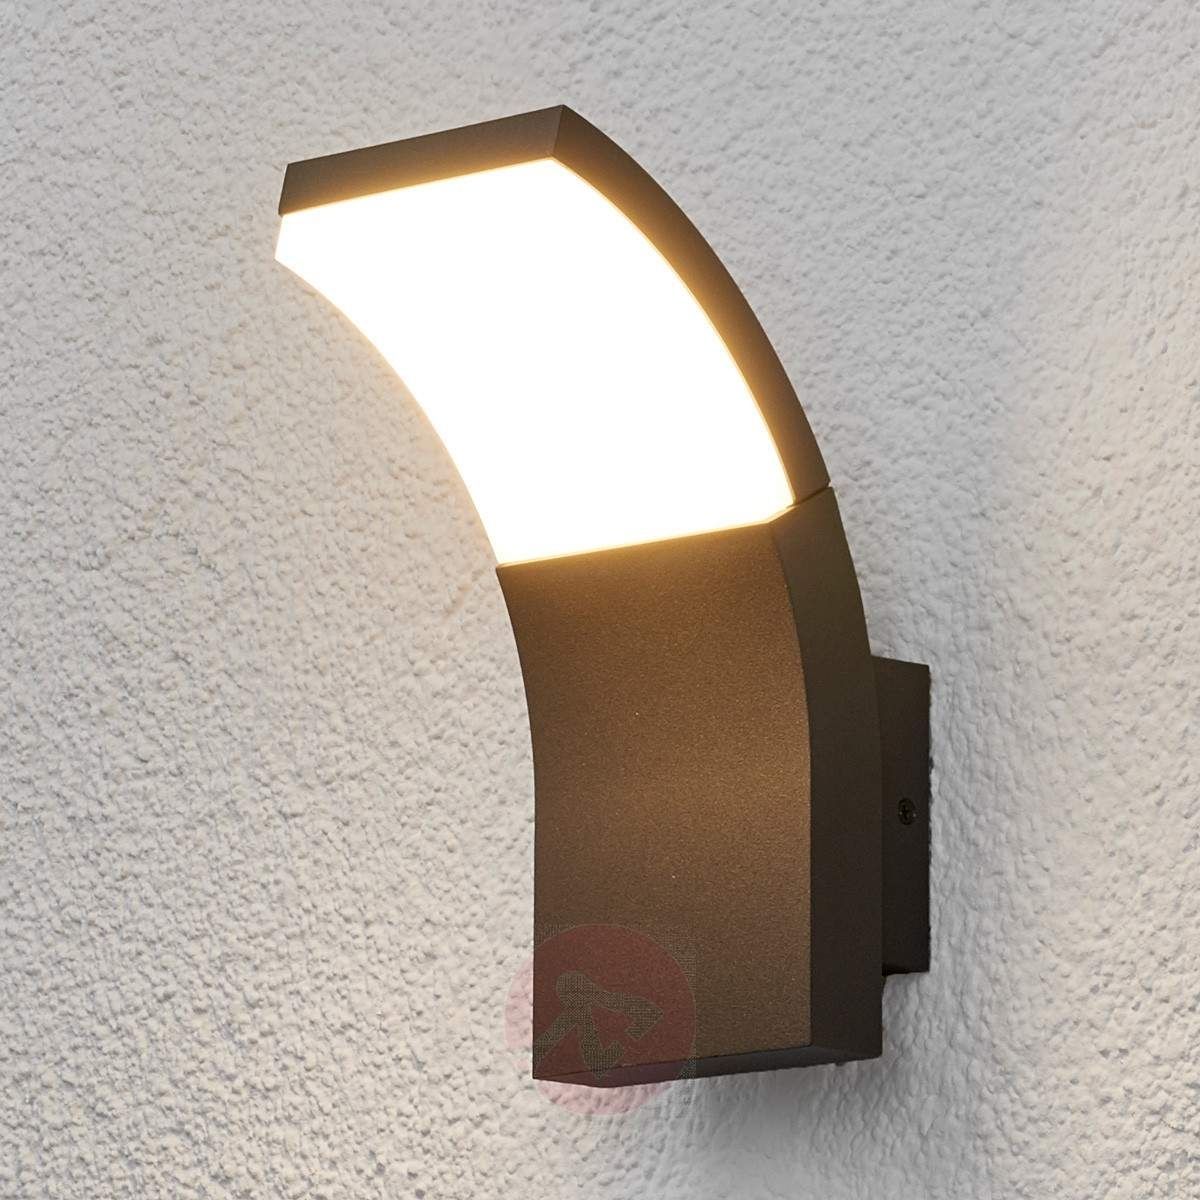 Led Outdoor Wall Light Timm Lights Co Uk Brilliant Led In 4 Within Outdoor Wall Spotlights (Photo 11 of 15)